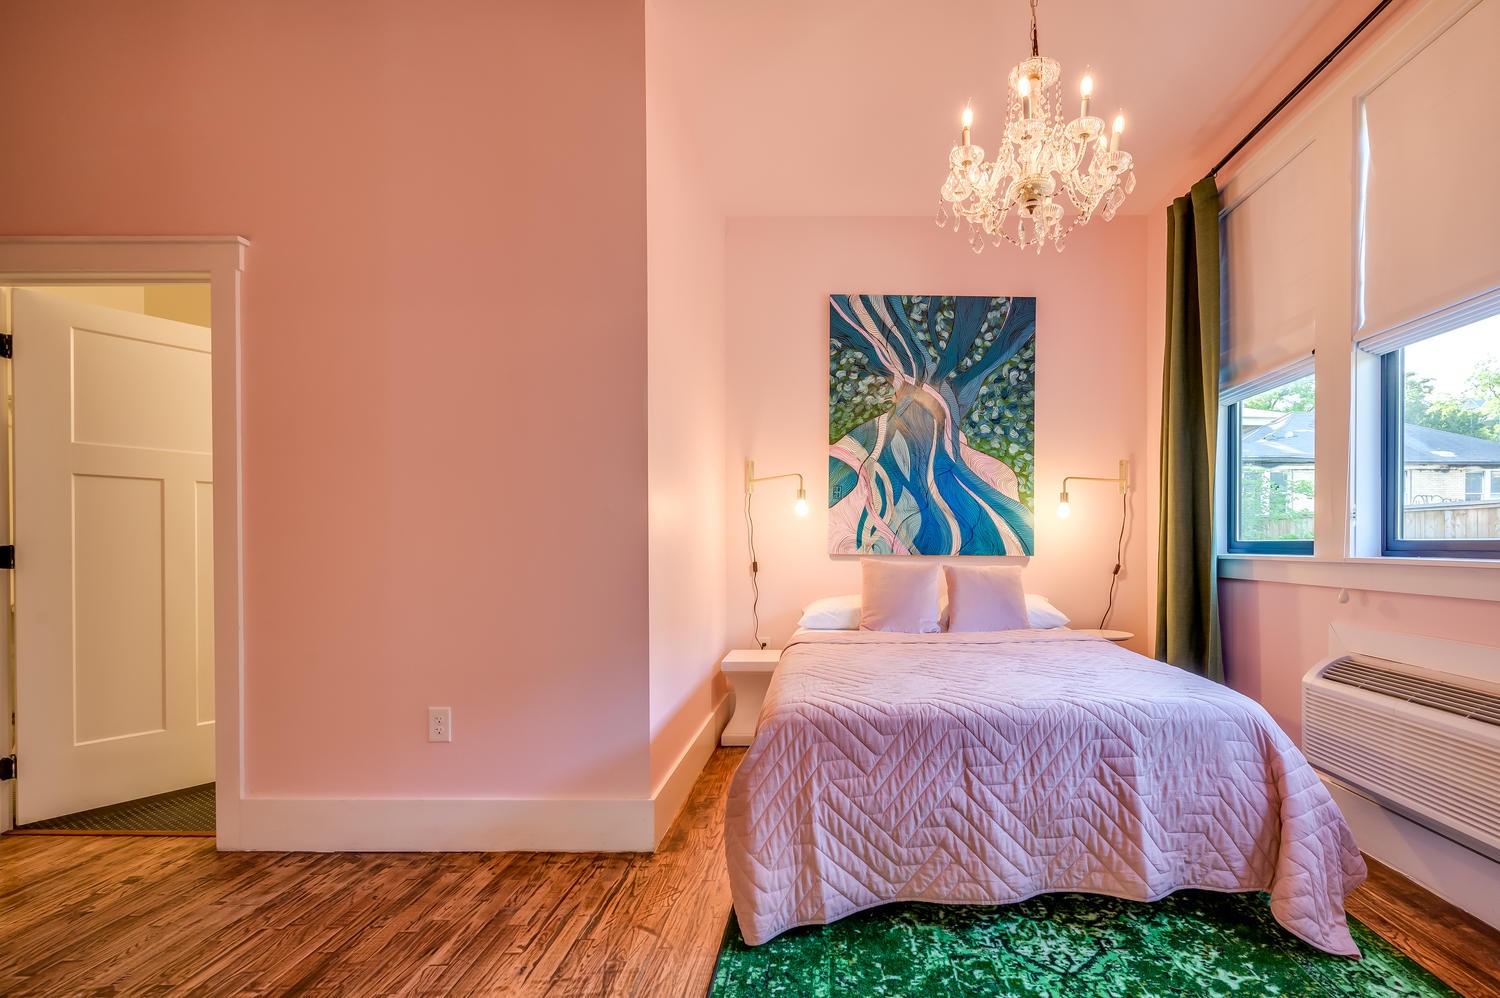 Suite 103 – The Accessible 1st Floor Chandelier Canopy Suite offers a King and Queen Casper Bed, Smart TV, and private Bathroom